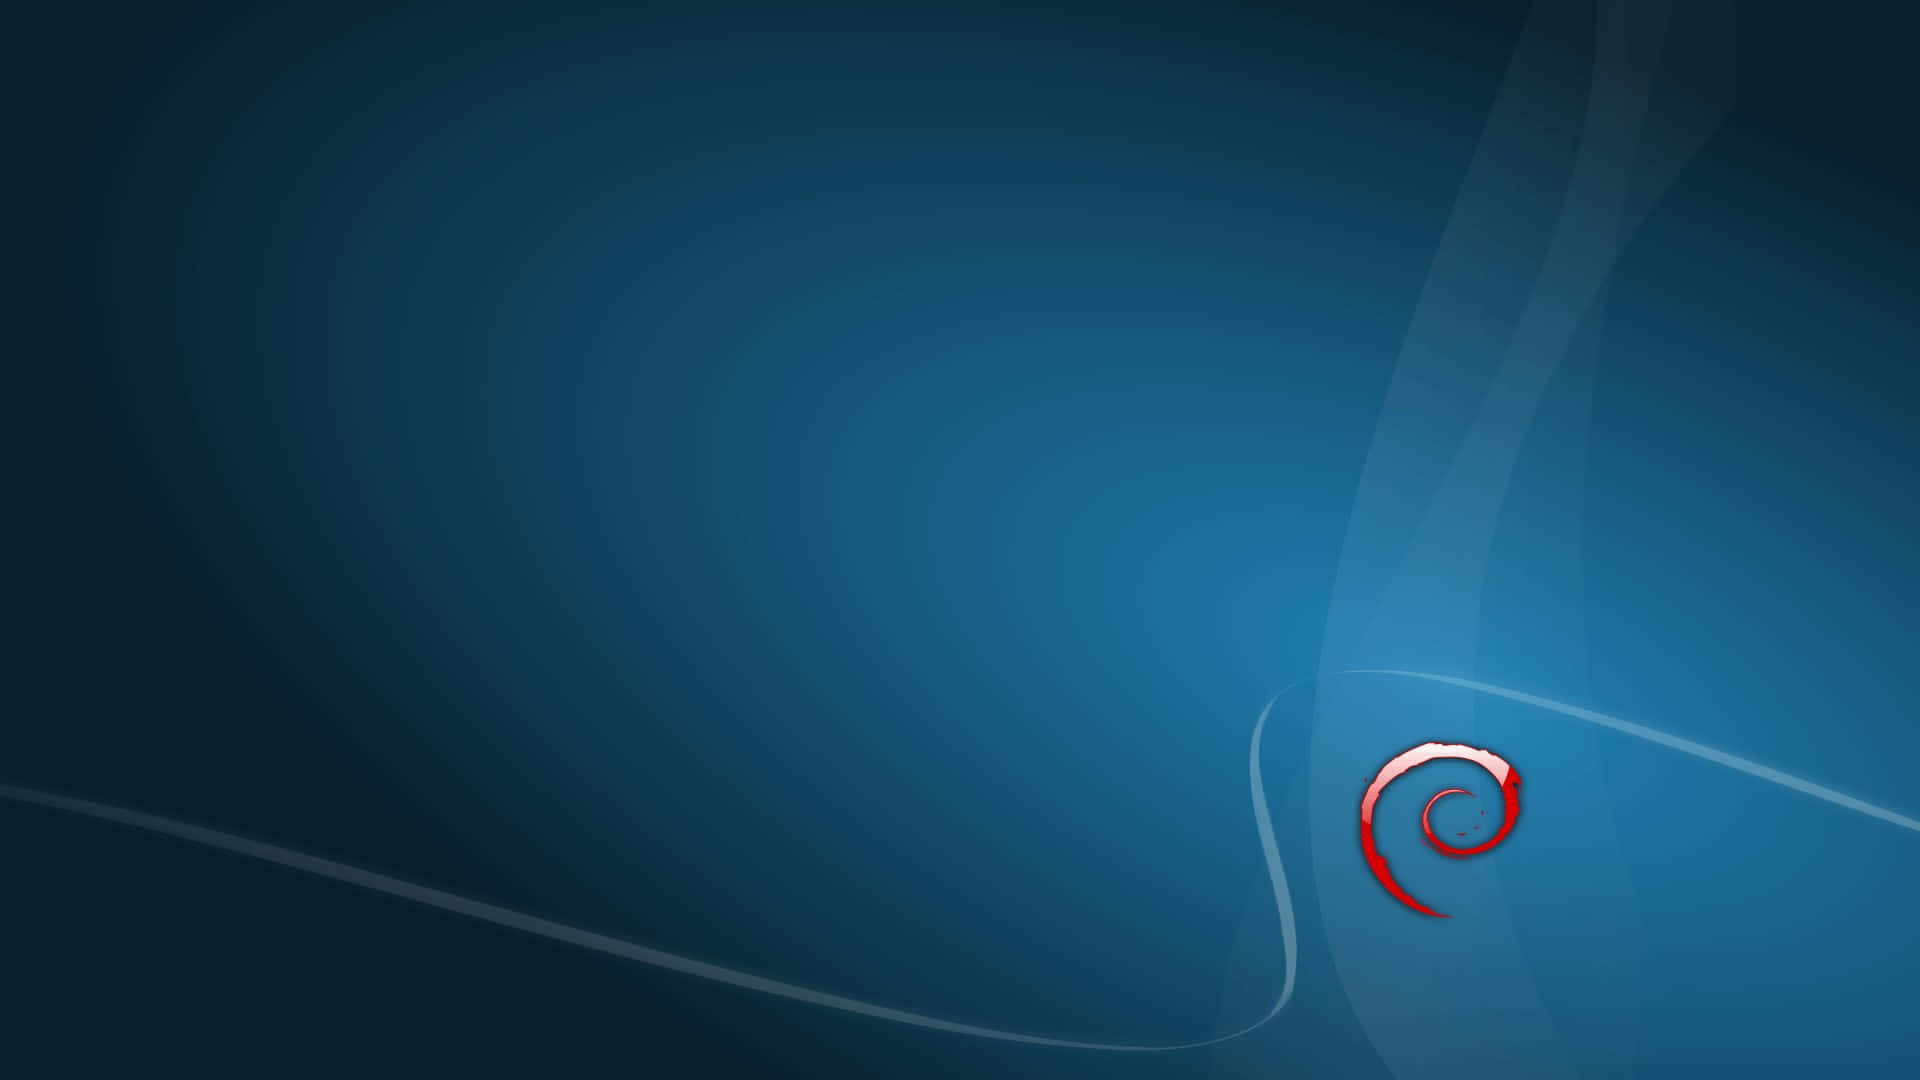 Debian Abstract Blue Background Wallpaper